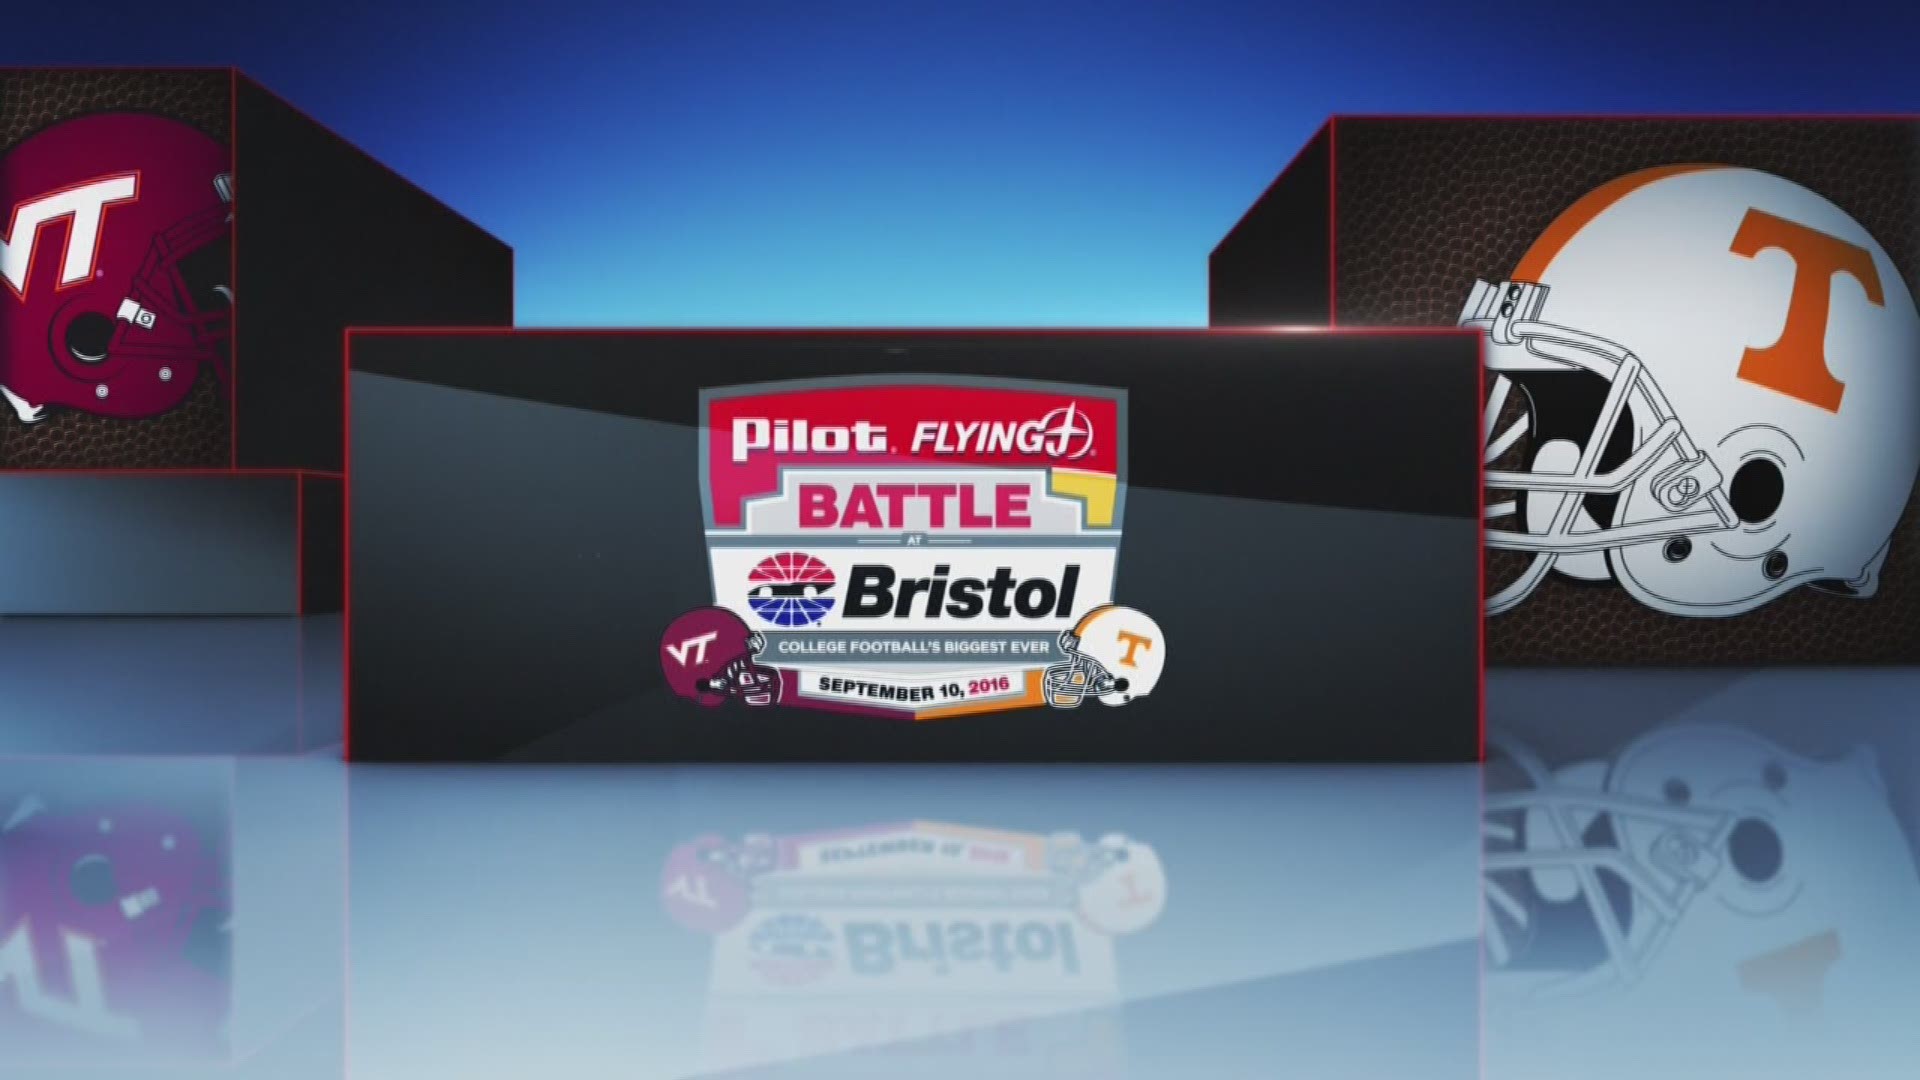 Saturday's big game between Tennessee and Virginia Tech kicks off at 8 p.m. ET at the Bristol Motor Speedway.